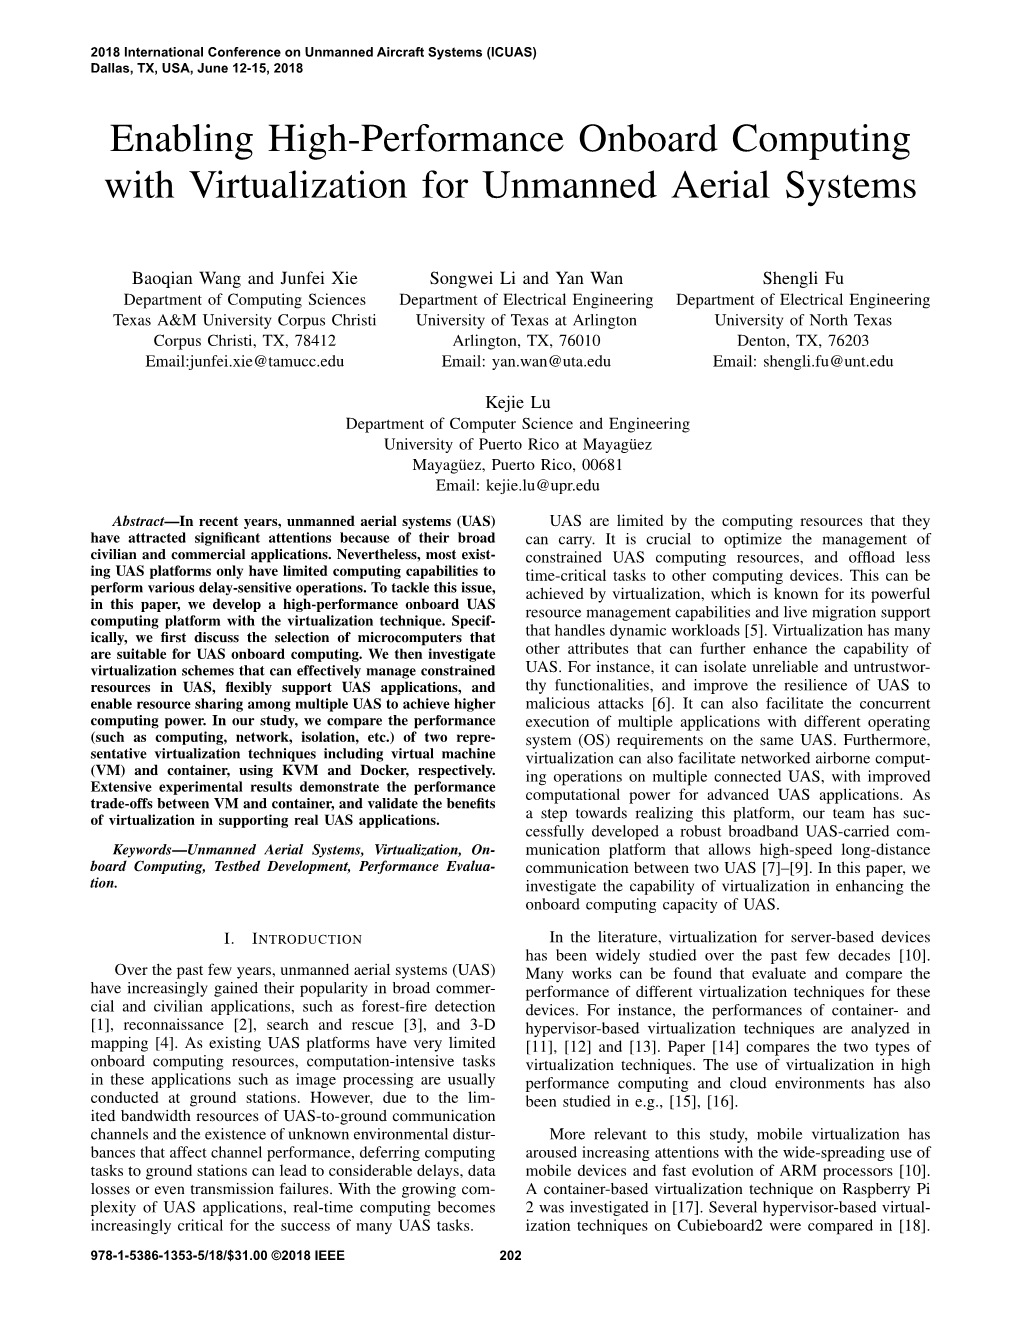 Enabling High-Performance Onboard Computing with Virtualization for Unmanned Aerial Systems